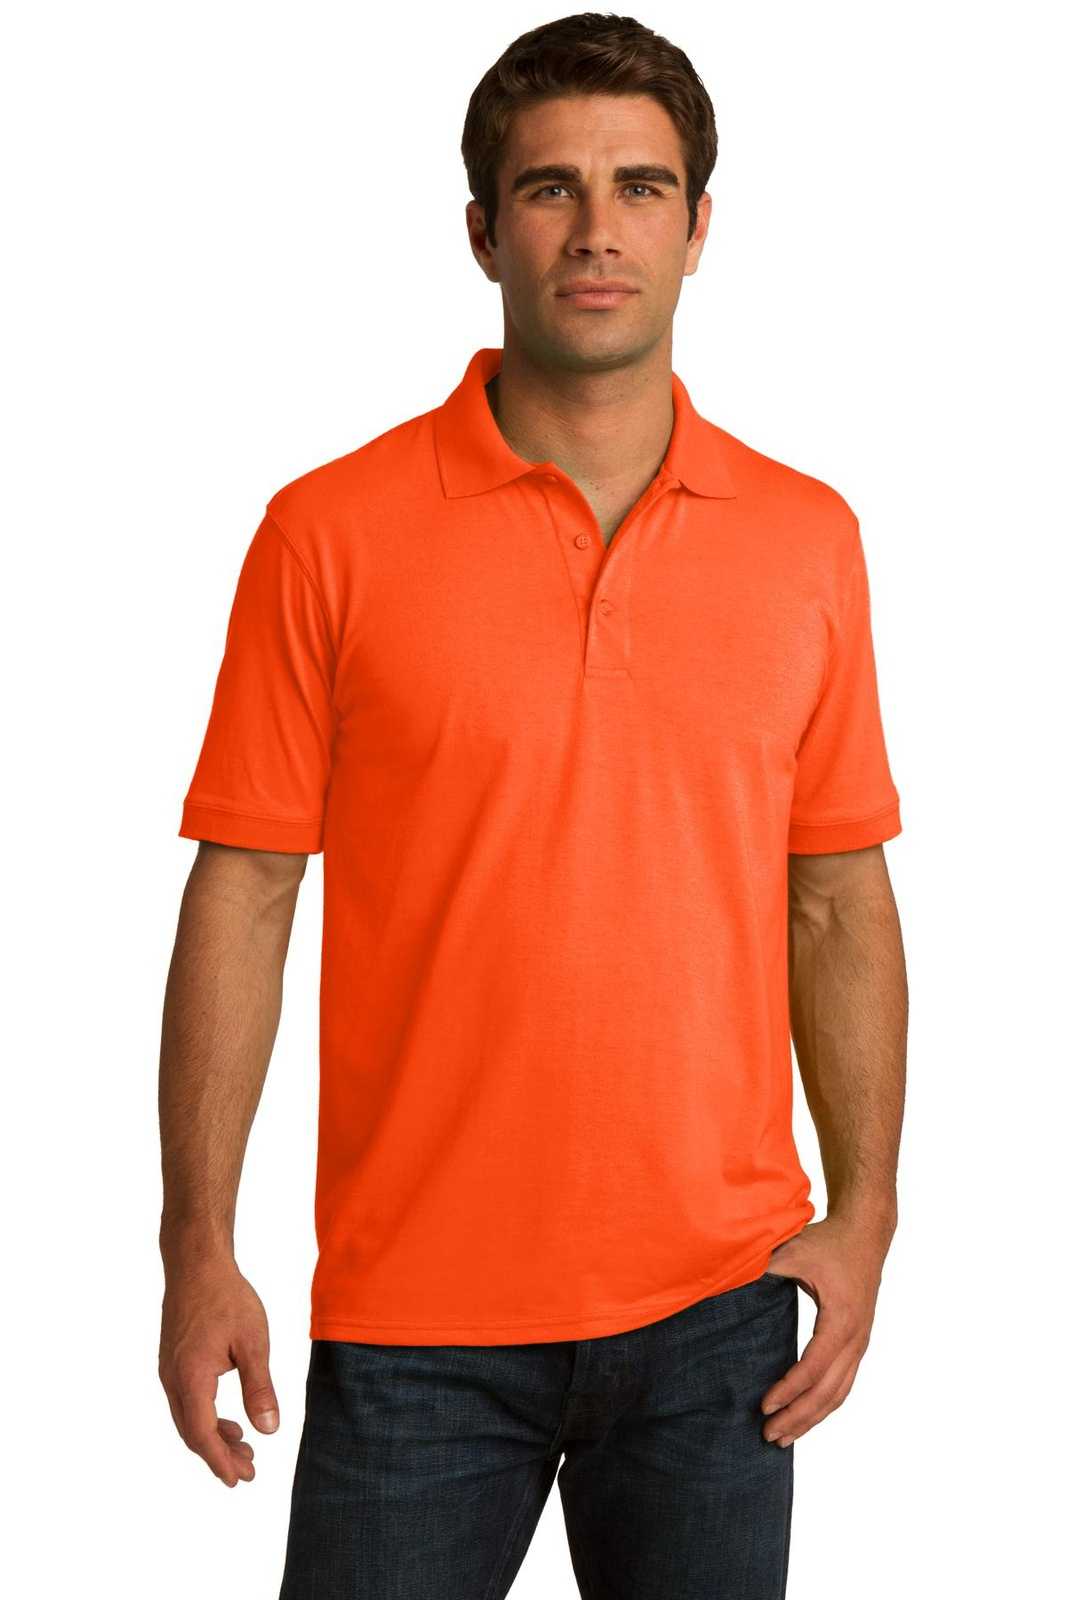 Port &amp; Company KP55T Tall Core Blend Jersey Knit Polo - Safety Orange - HIT a Double - 1